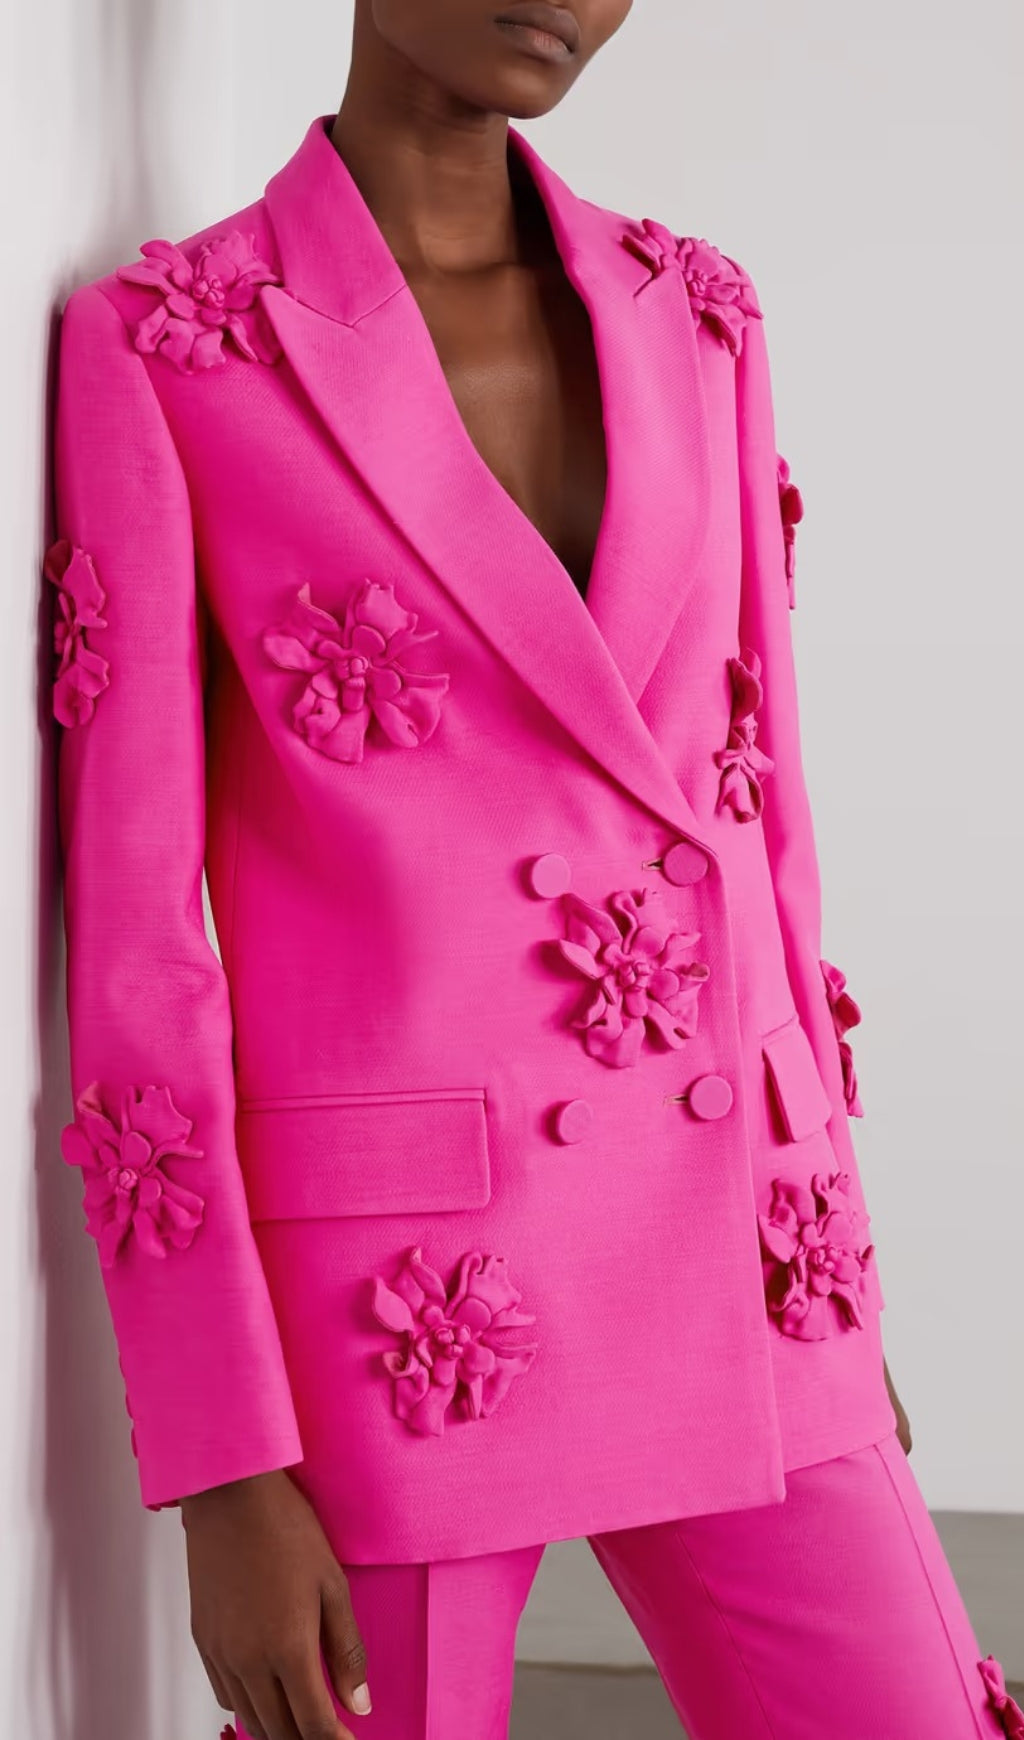 GIANNA Stereo Suit JACKET in Pink